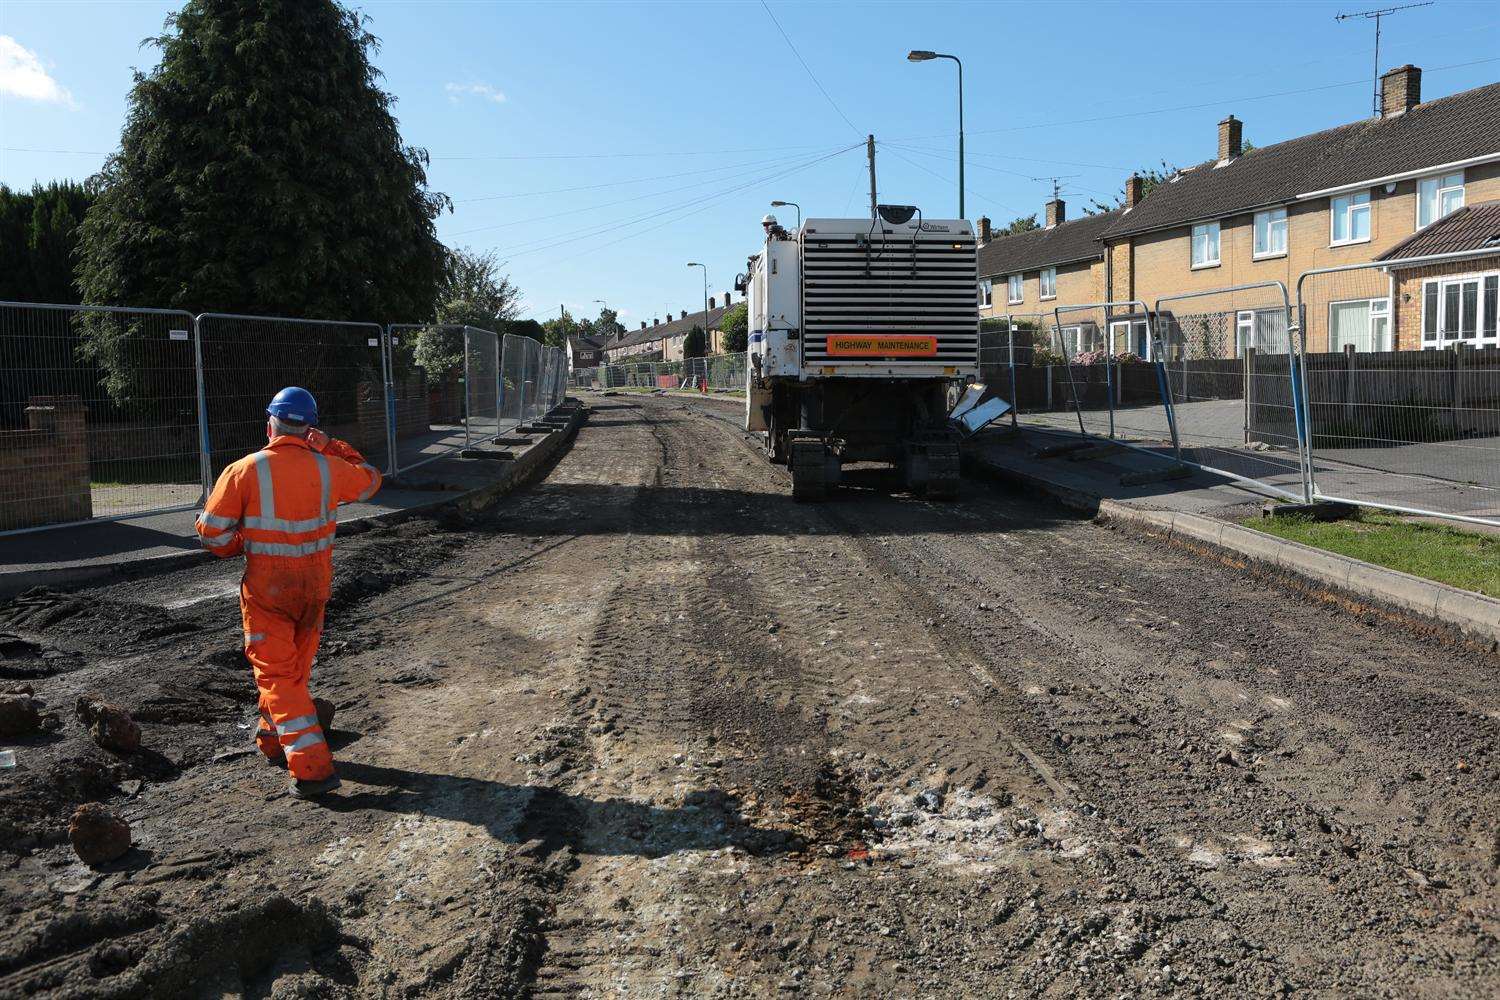 Work to completely rebuild Willington Street, a former farm track, is rapidly approaching deadline